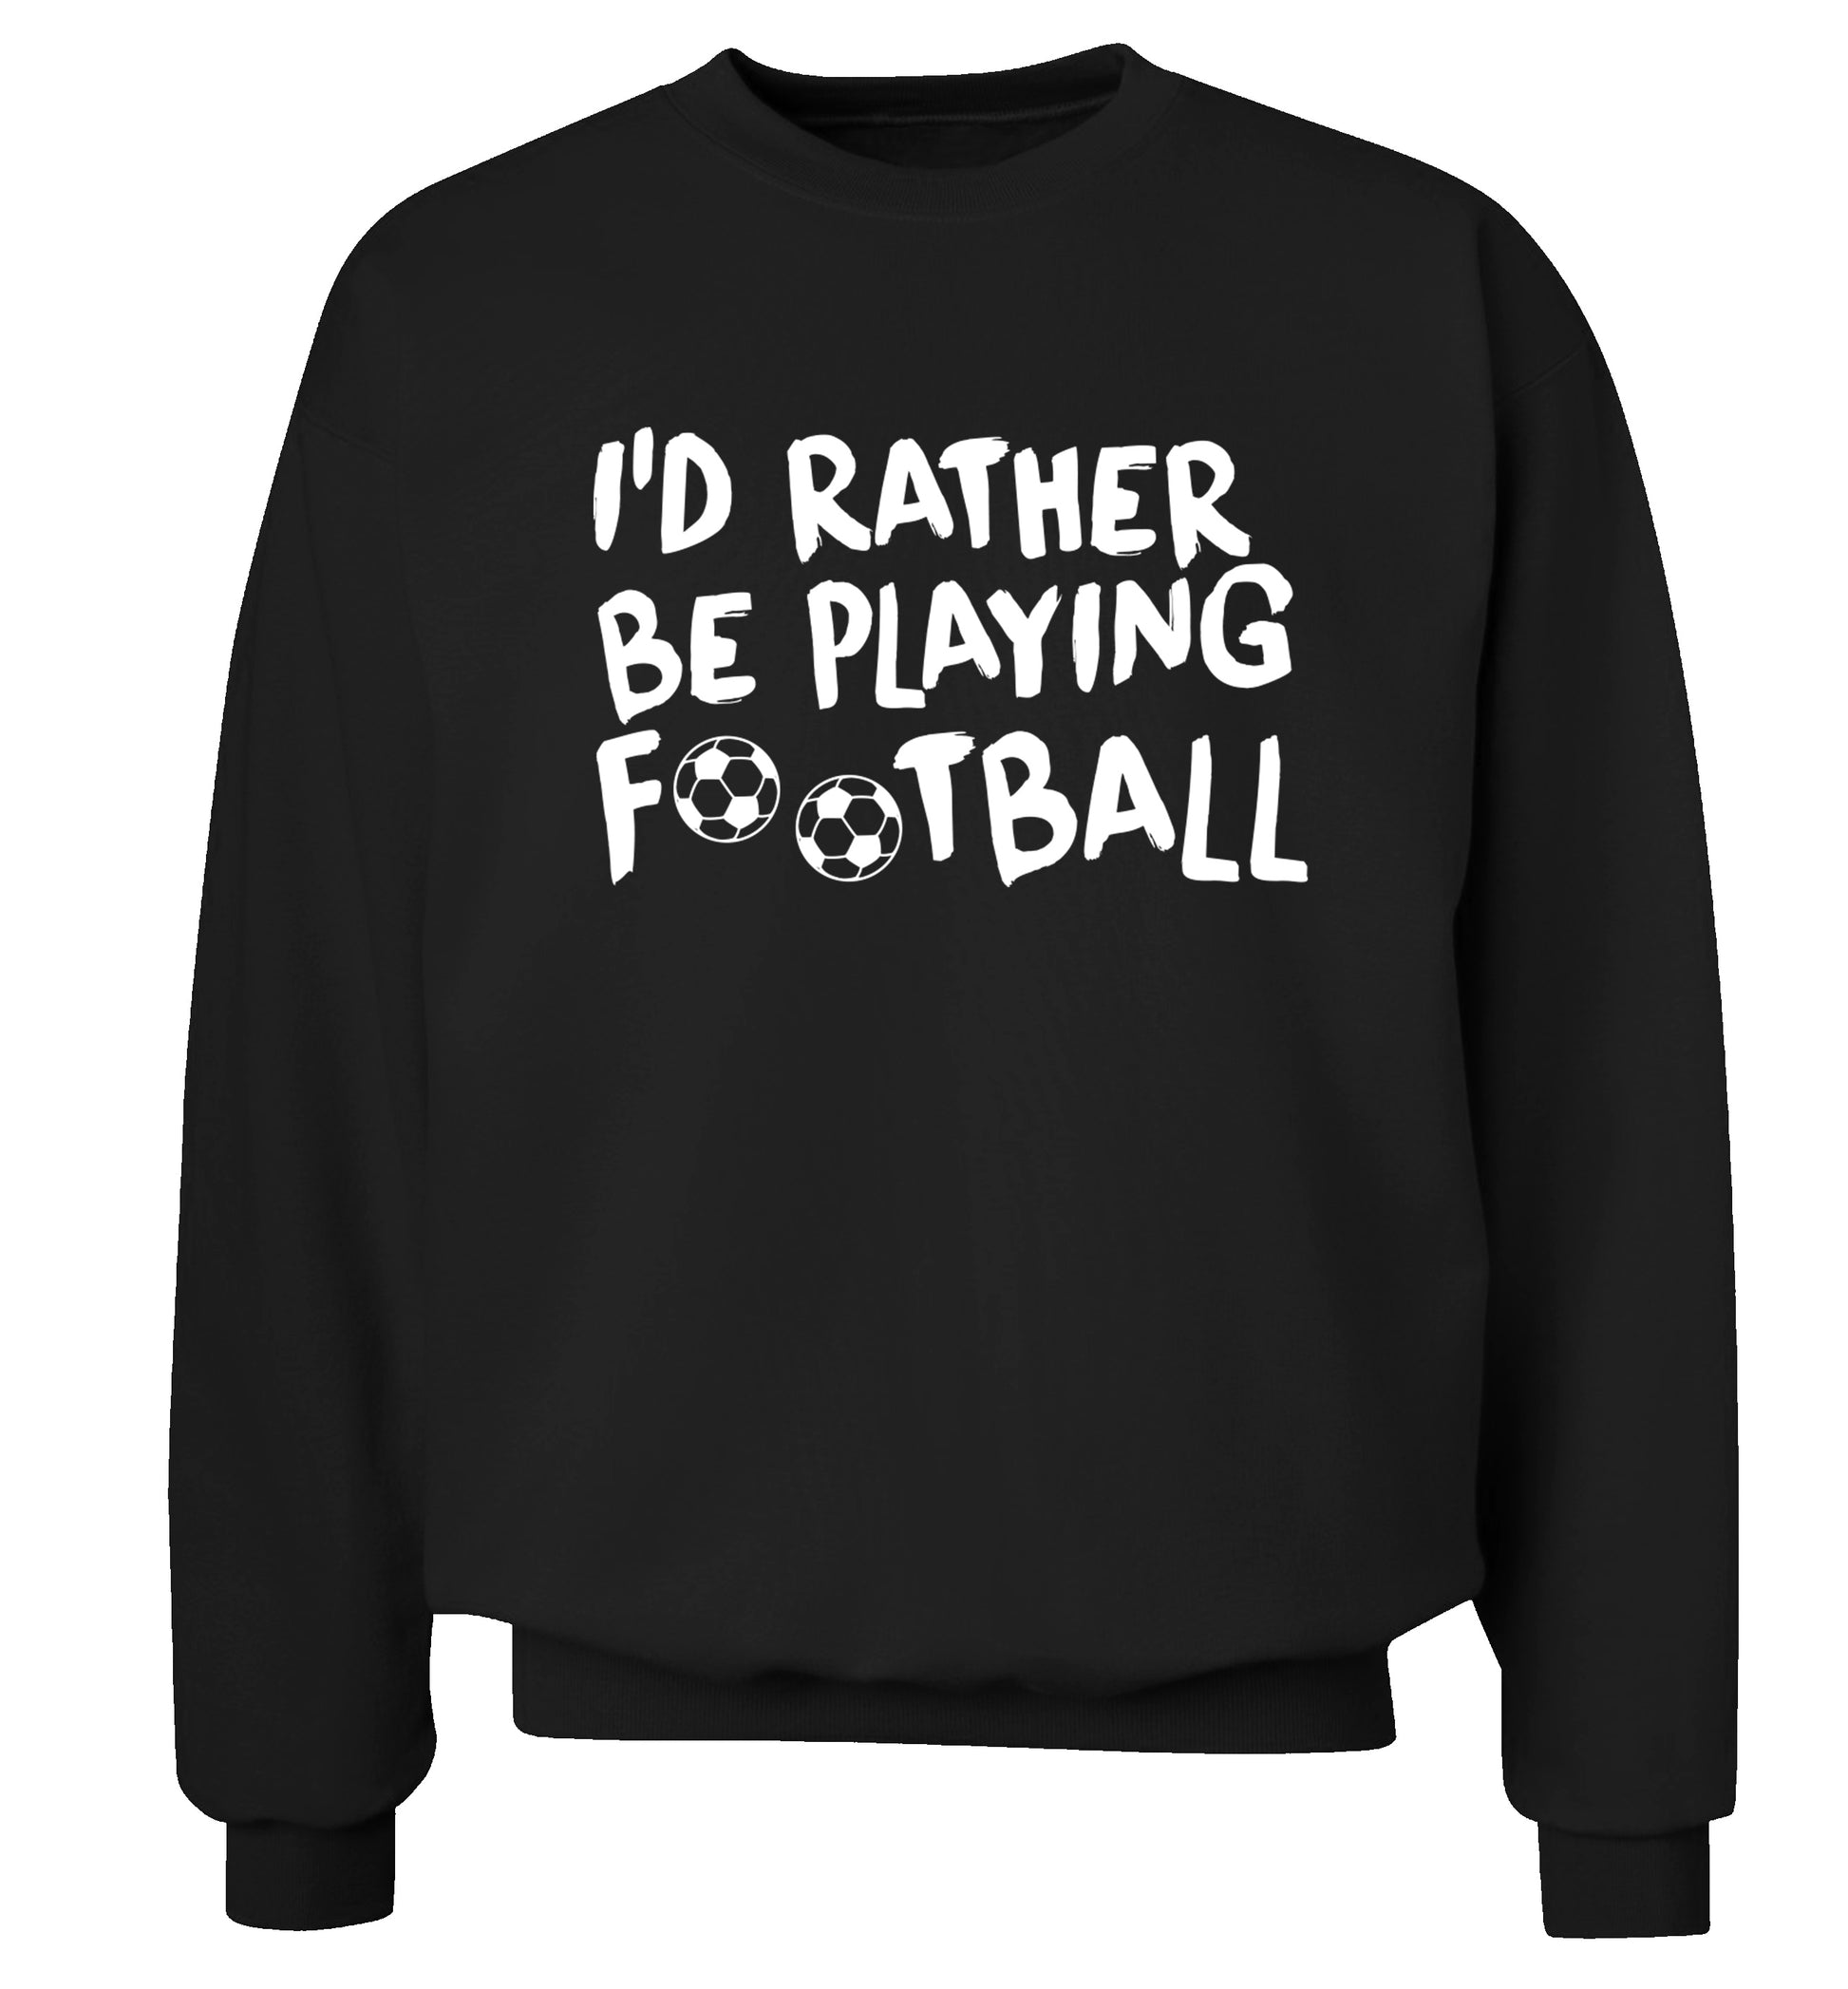 I'd rather be playing football Adult's unisexblack Sweater 2XL